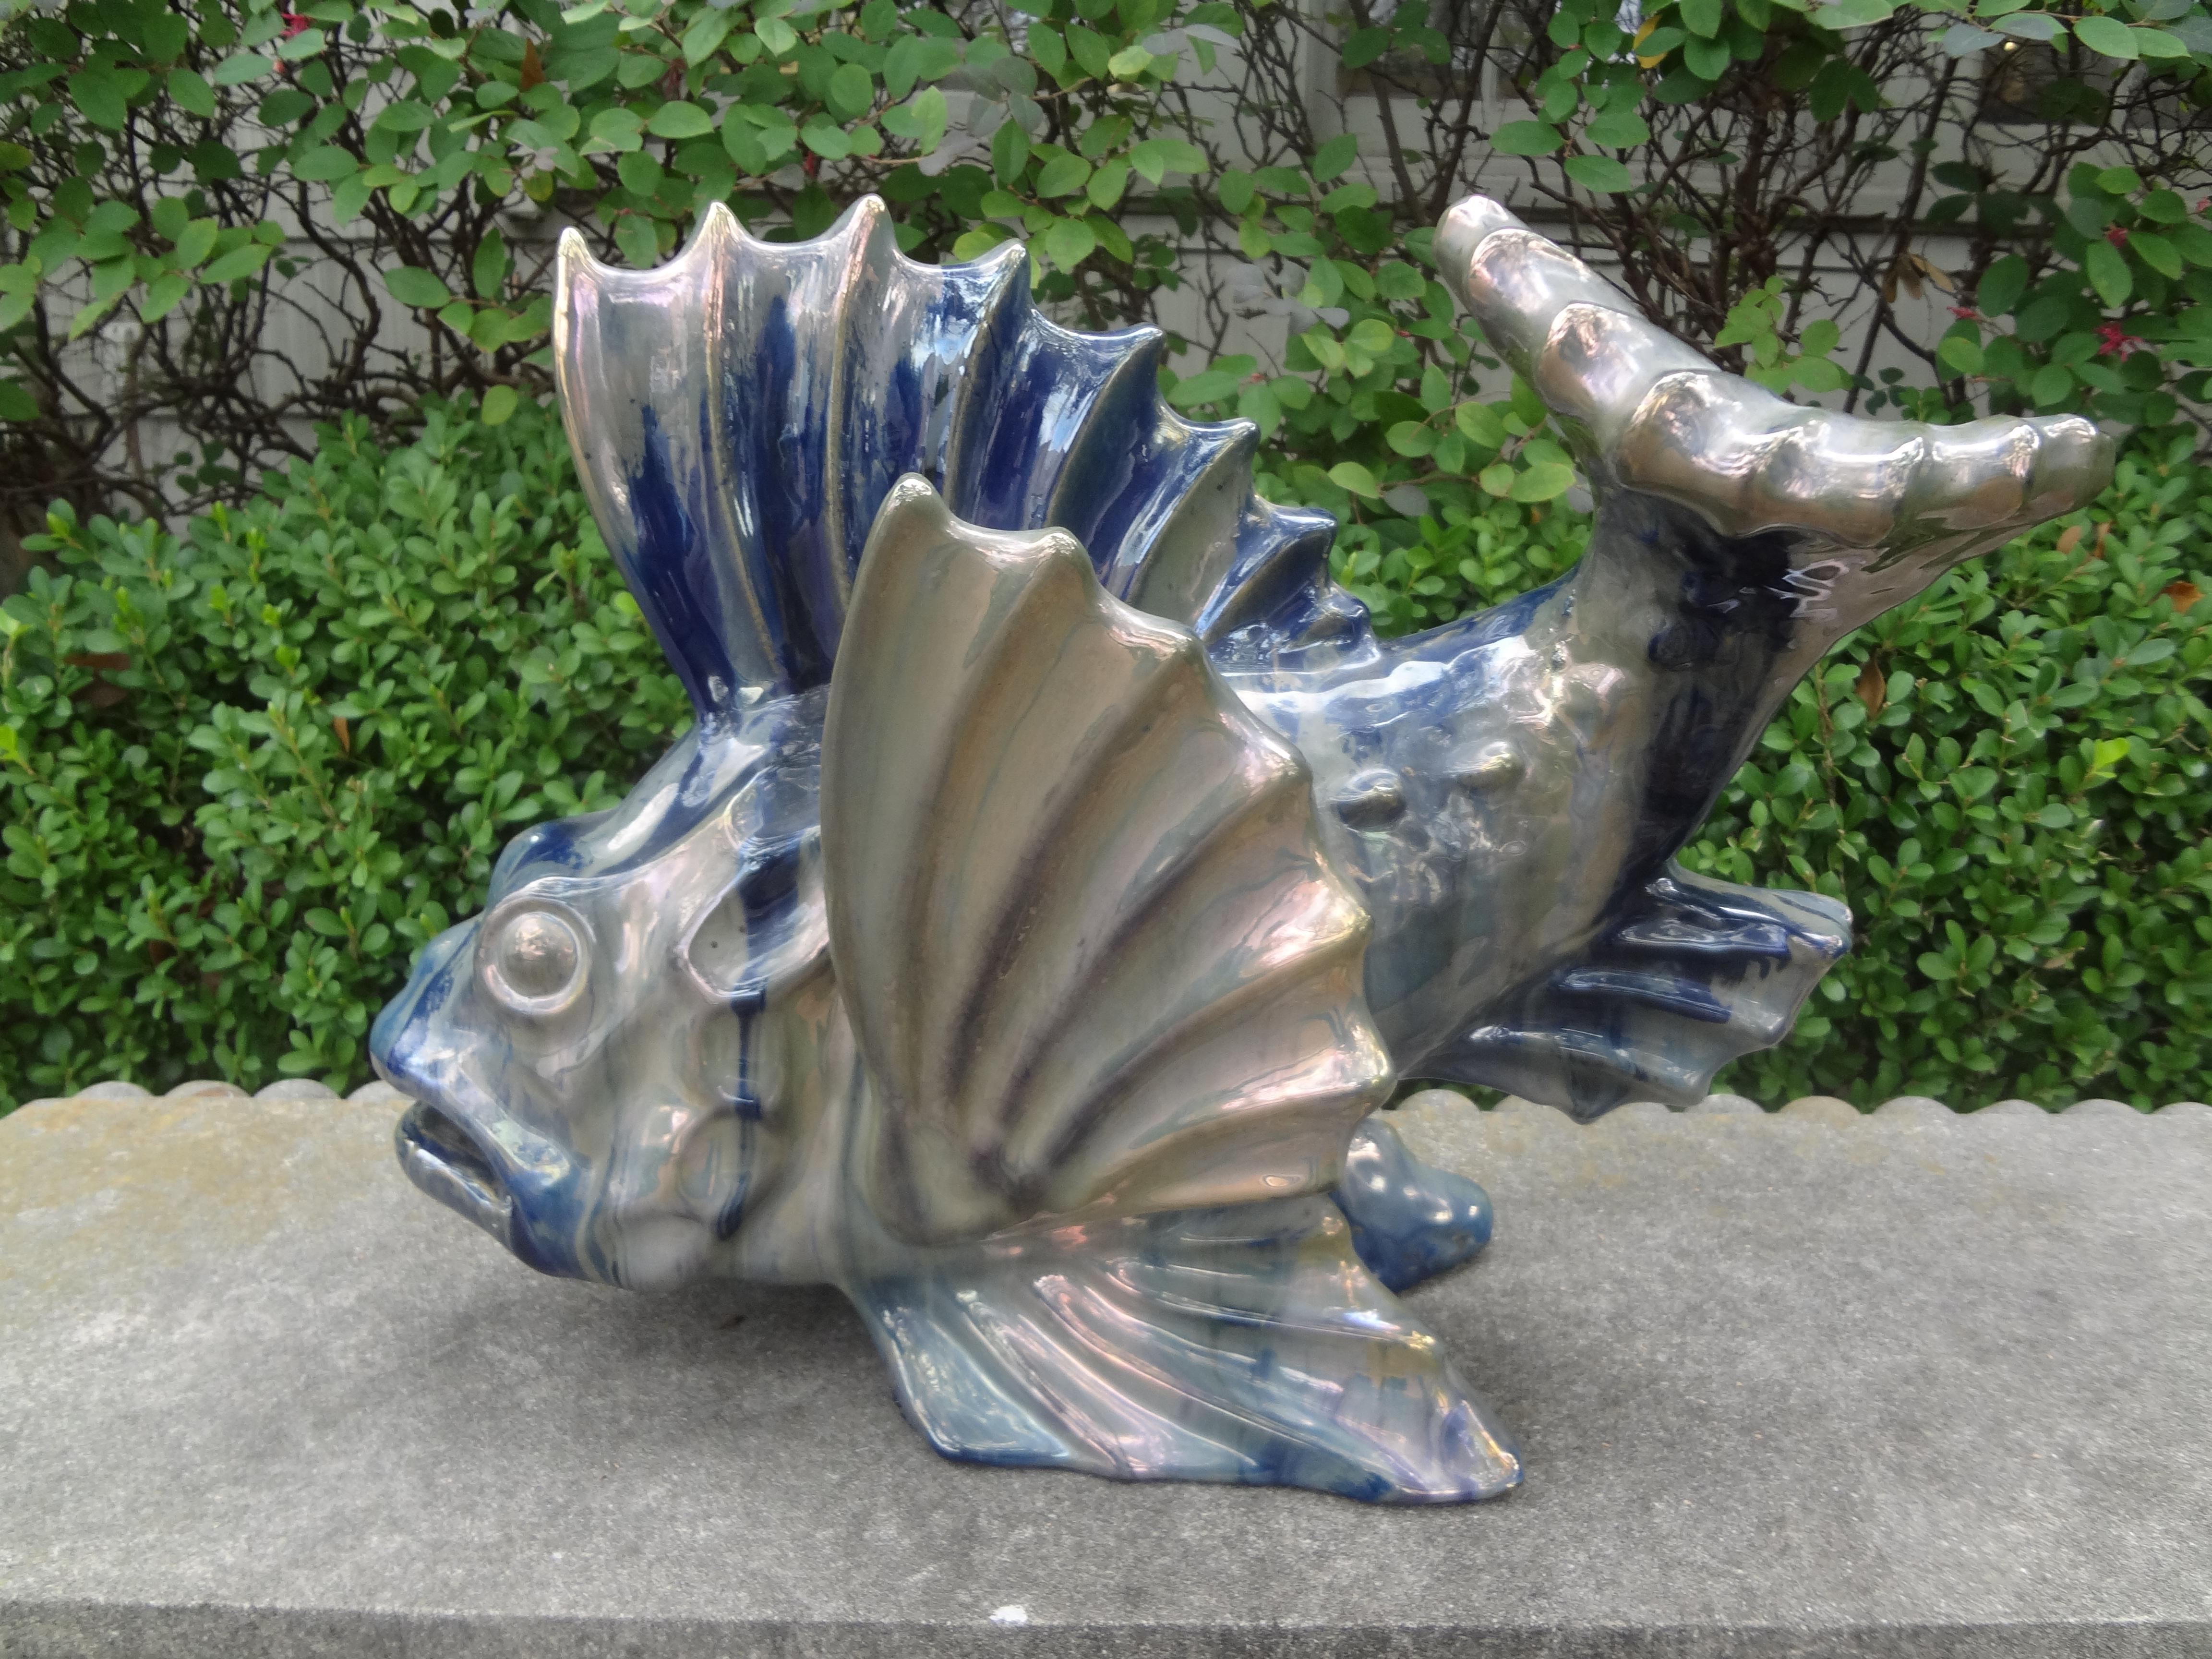 French Glazed Terracotta fish sculpture.
Interesting antique French iridescent glazed terracotta fish sculpture. This French fish figure is executed in iridescent tones of blue and green with beautiful movement. This French Art Deco stylized fish